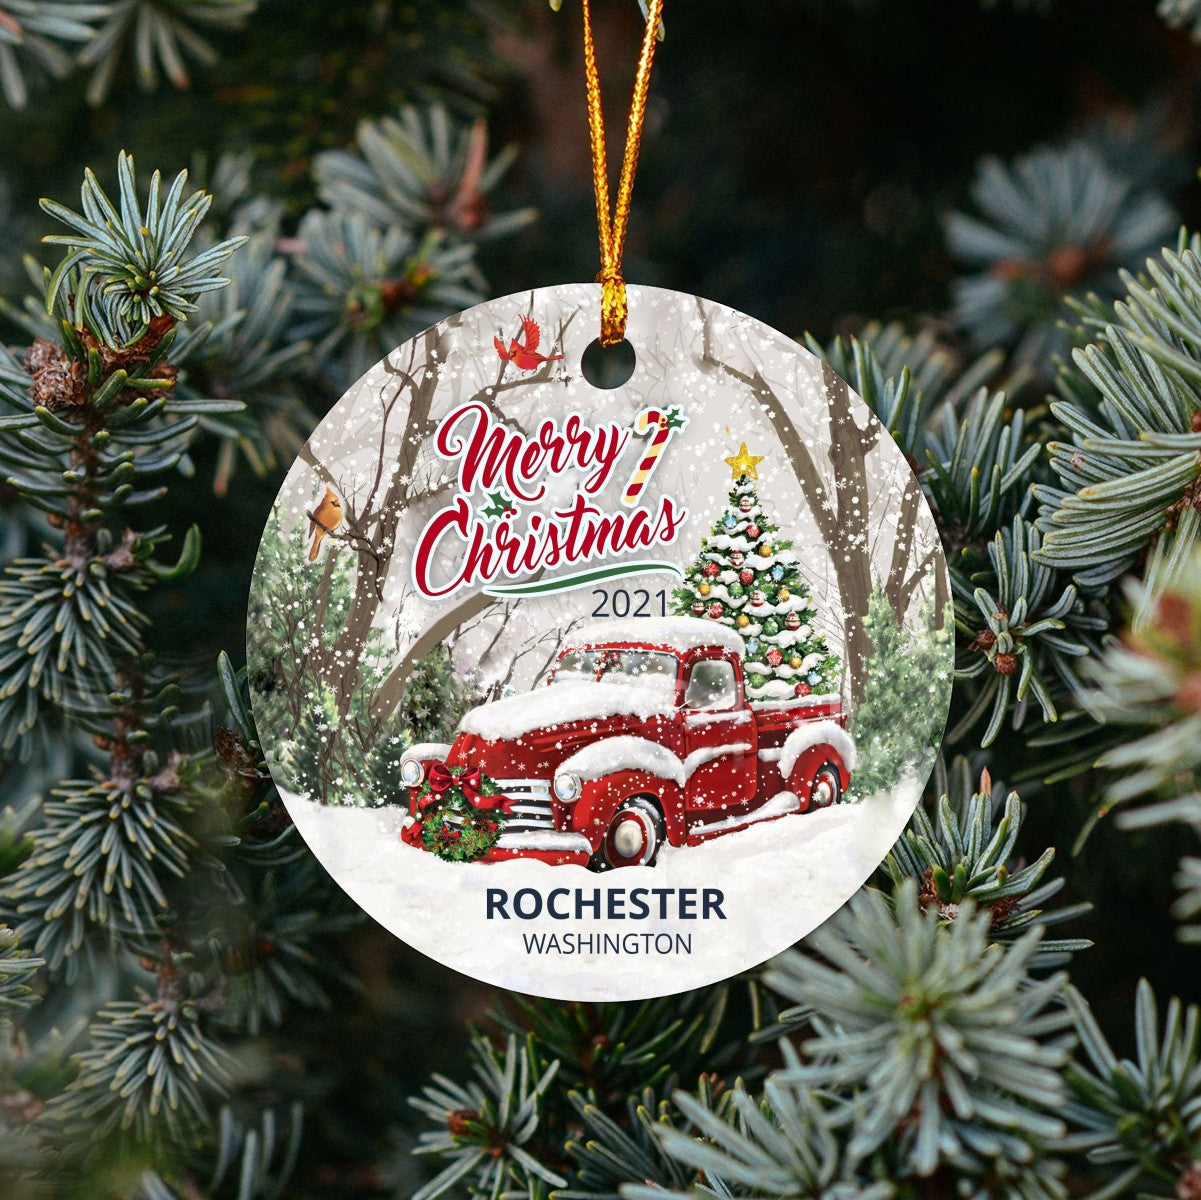 Christmas Tree Ornaments Rochester - Ornament With Name City, State Rochester Washington WA Ornament - Red Truck Xmas Ornaments 3'' Plastic Gift For Family, Friend And Housewarming